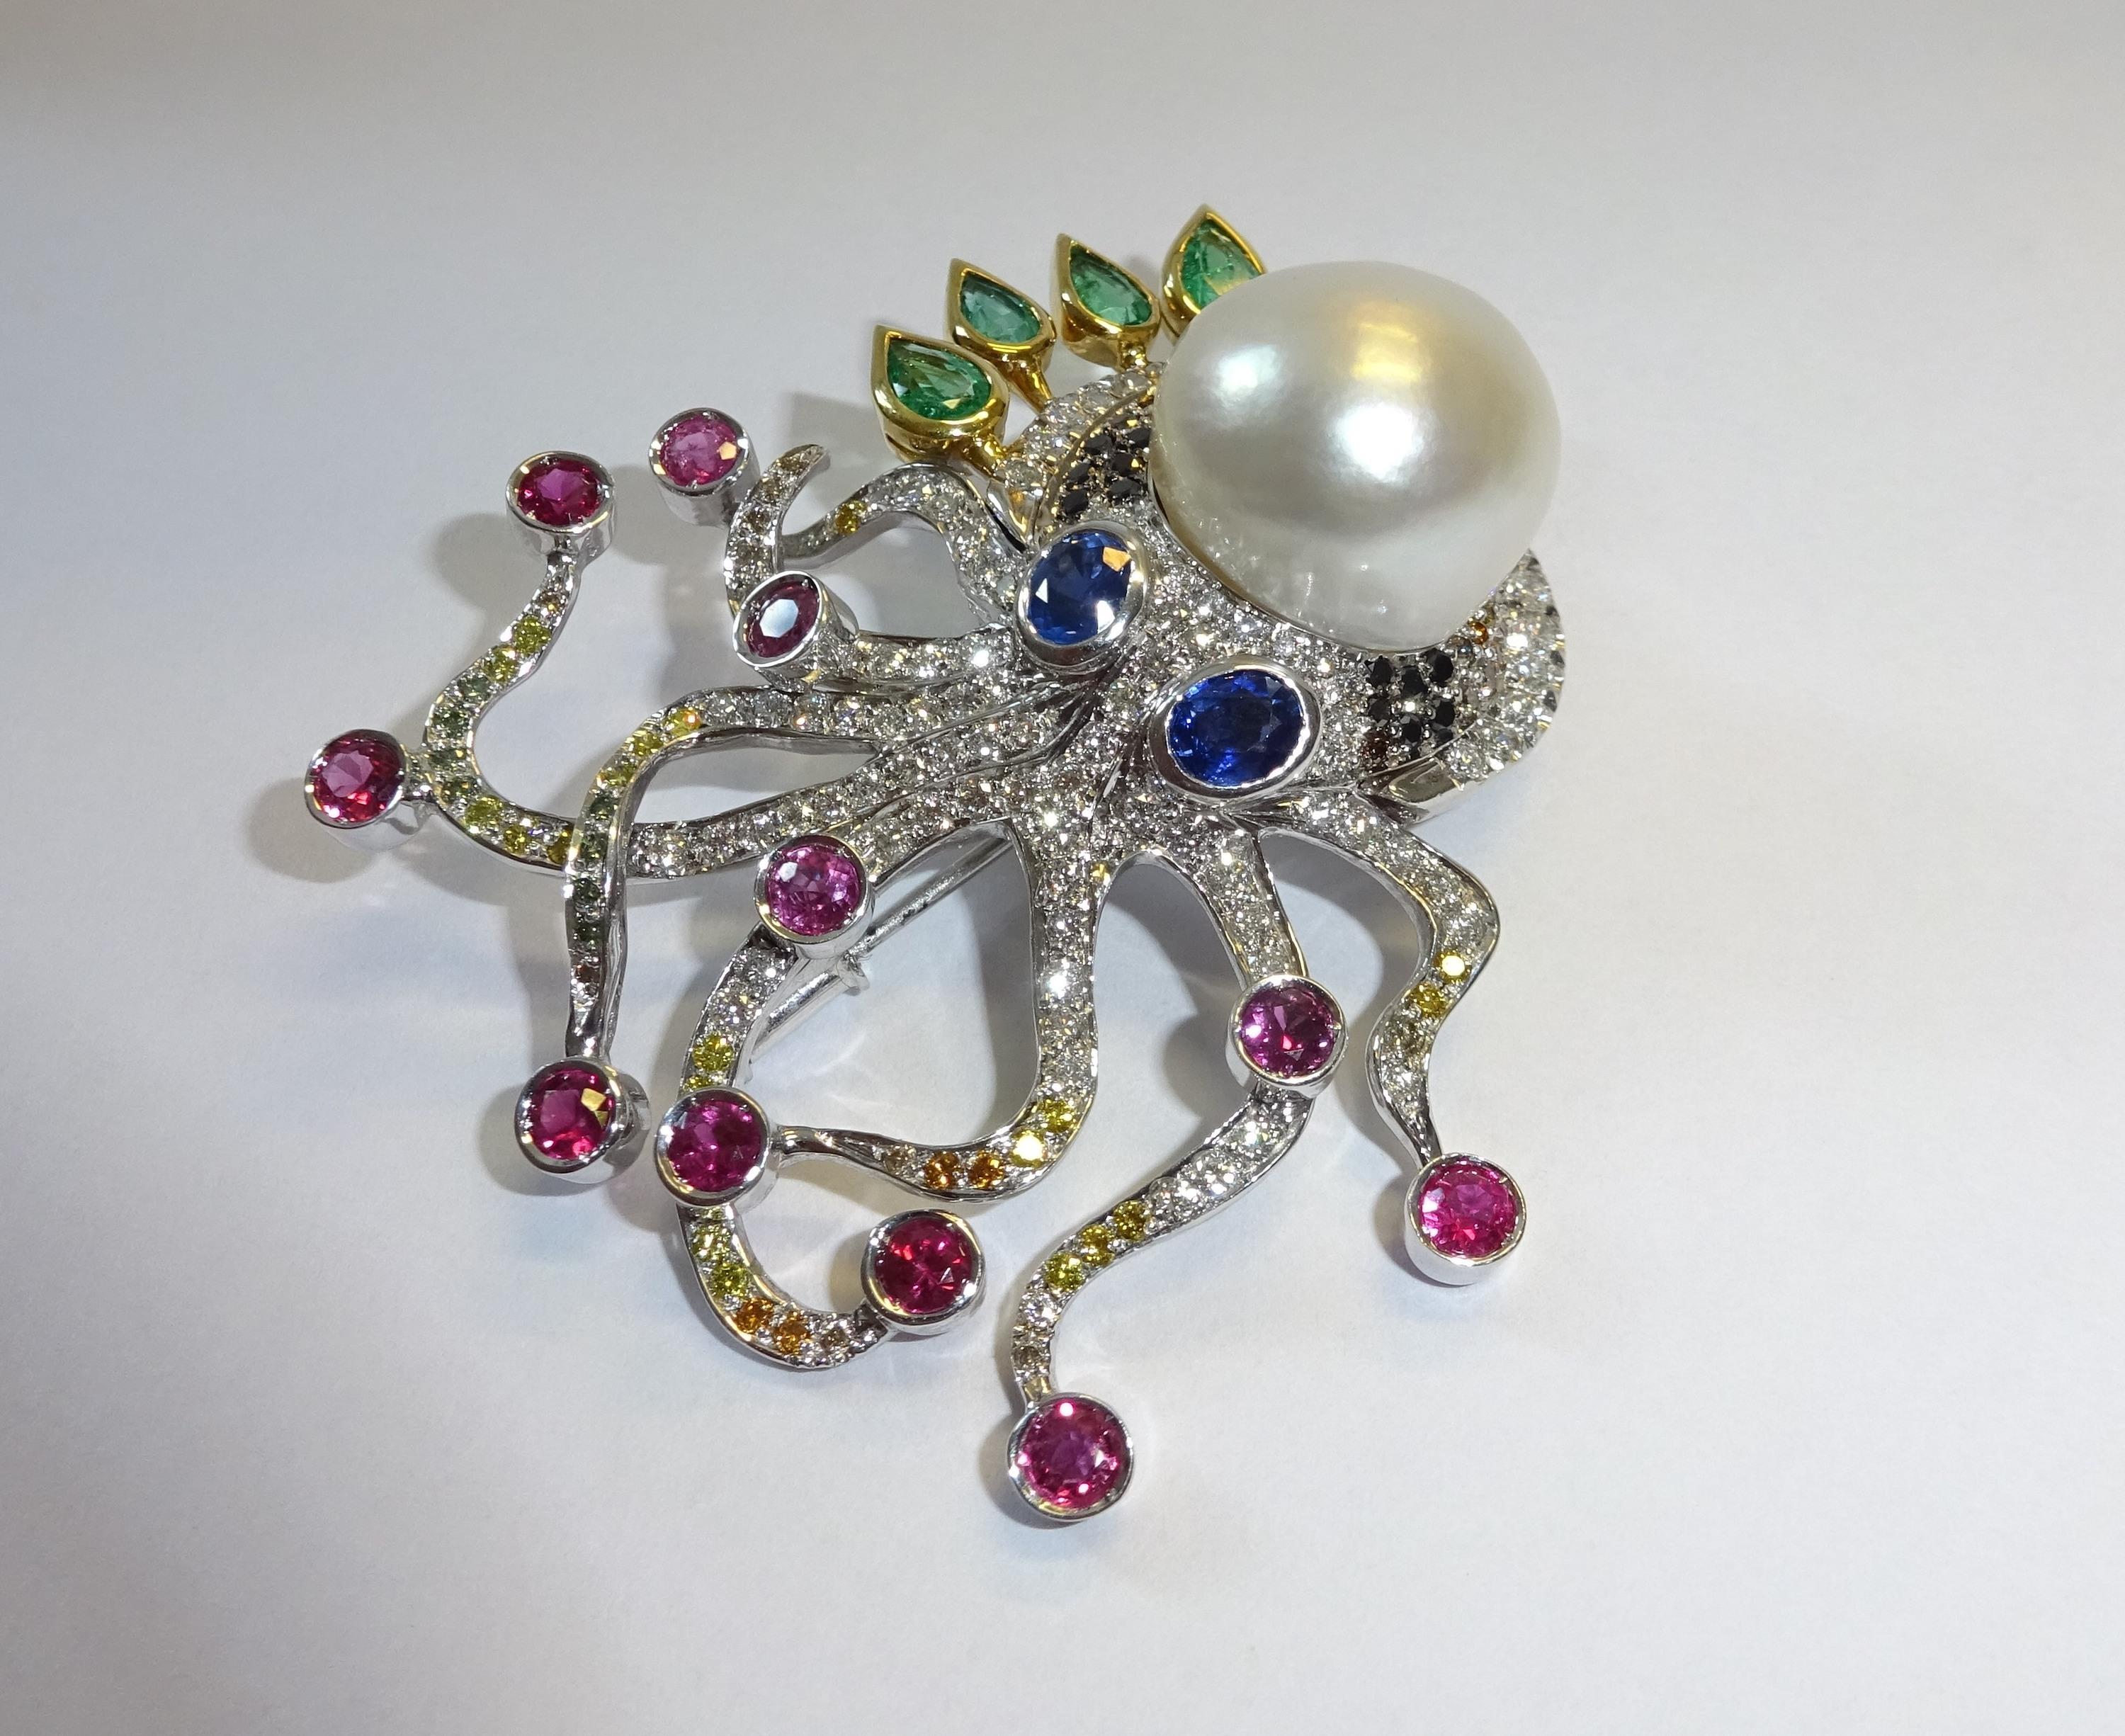 18 Karat  Gold Diamond, pearl  and color stonesOctopus Brooch


167 Diamonds 2.55 Carat
1 Pearl Soud See 15 mm
18 Sap./Emeralds/ Ruby 4.15Carat



Founded in 1974, Gianni Lazzaro is a family-owned jewelery company based out of Düsseldorf,